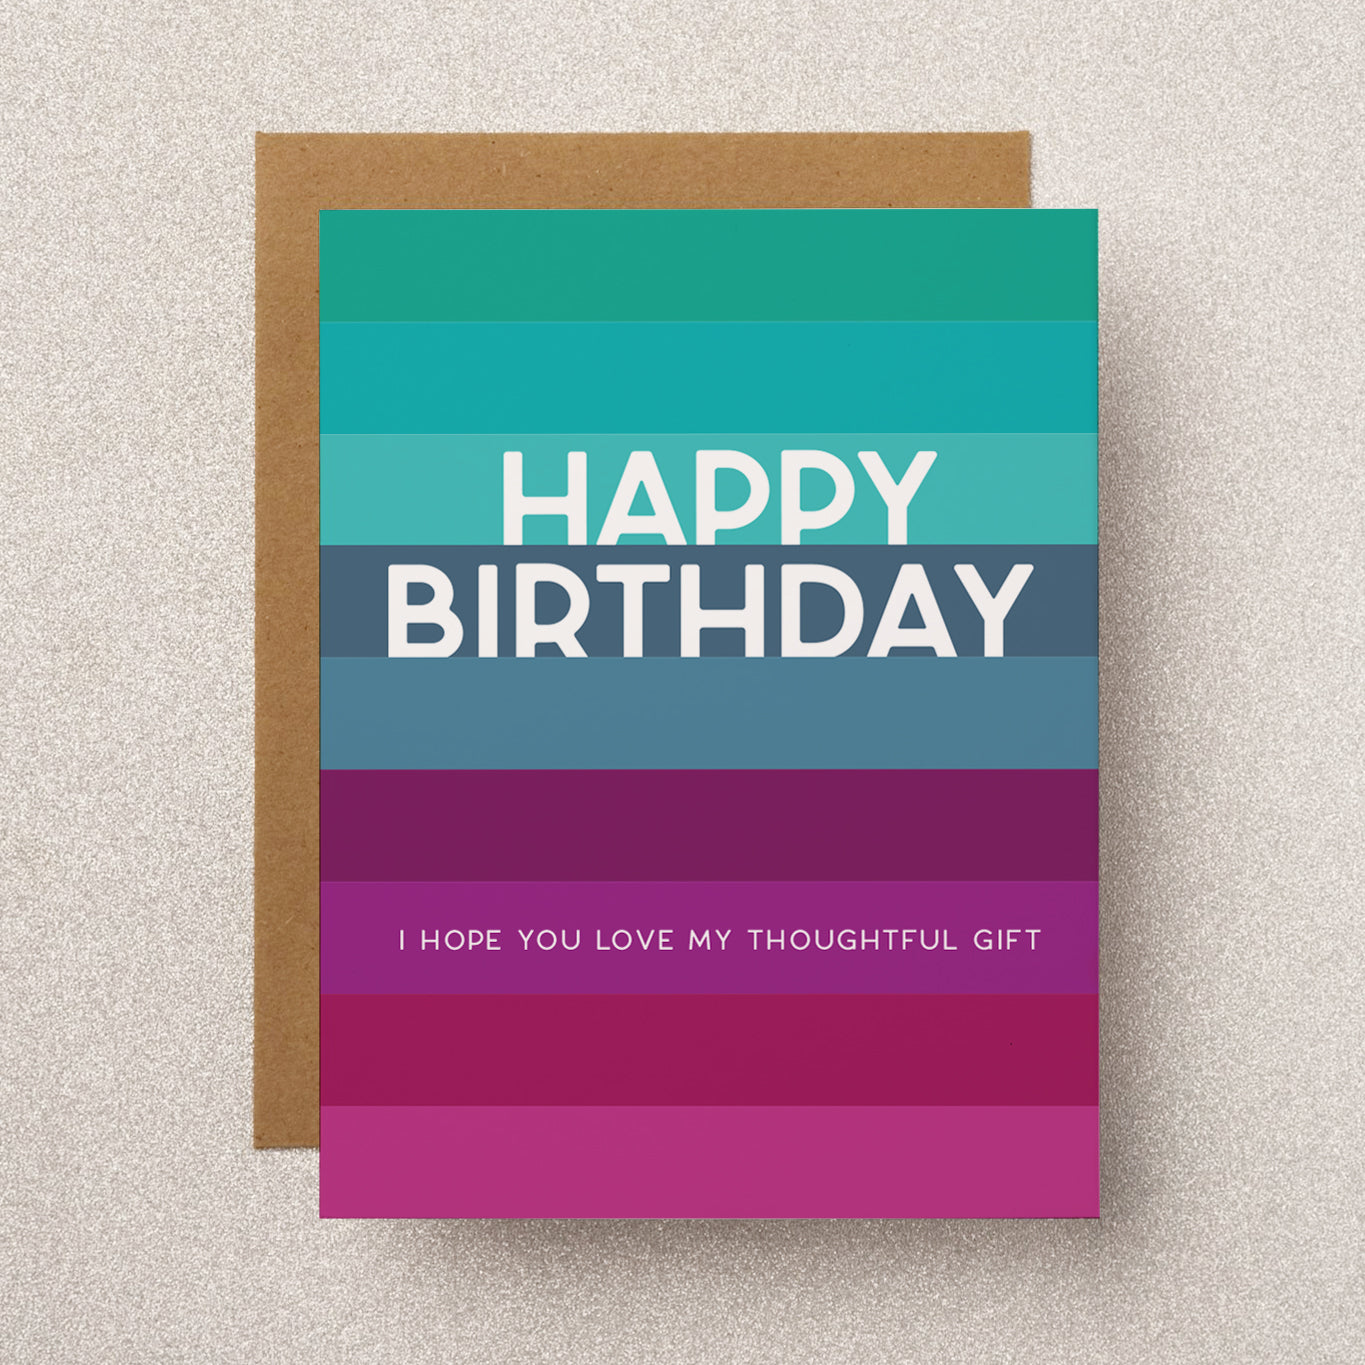 A sarcastic and unique birthday greeting card that reads "I hope you love my thoughtful gift" on the front side.